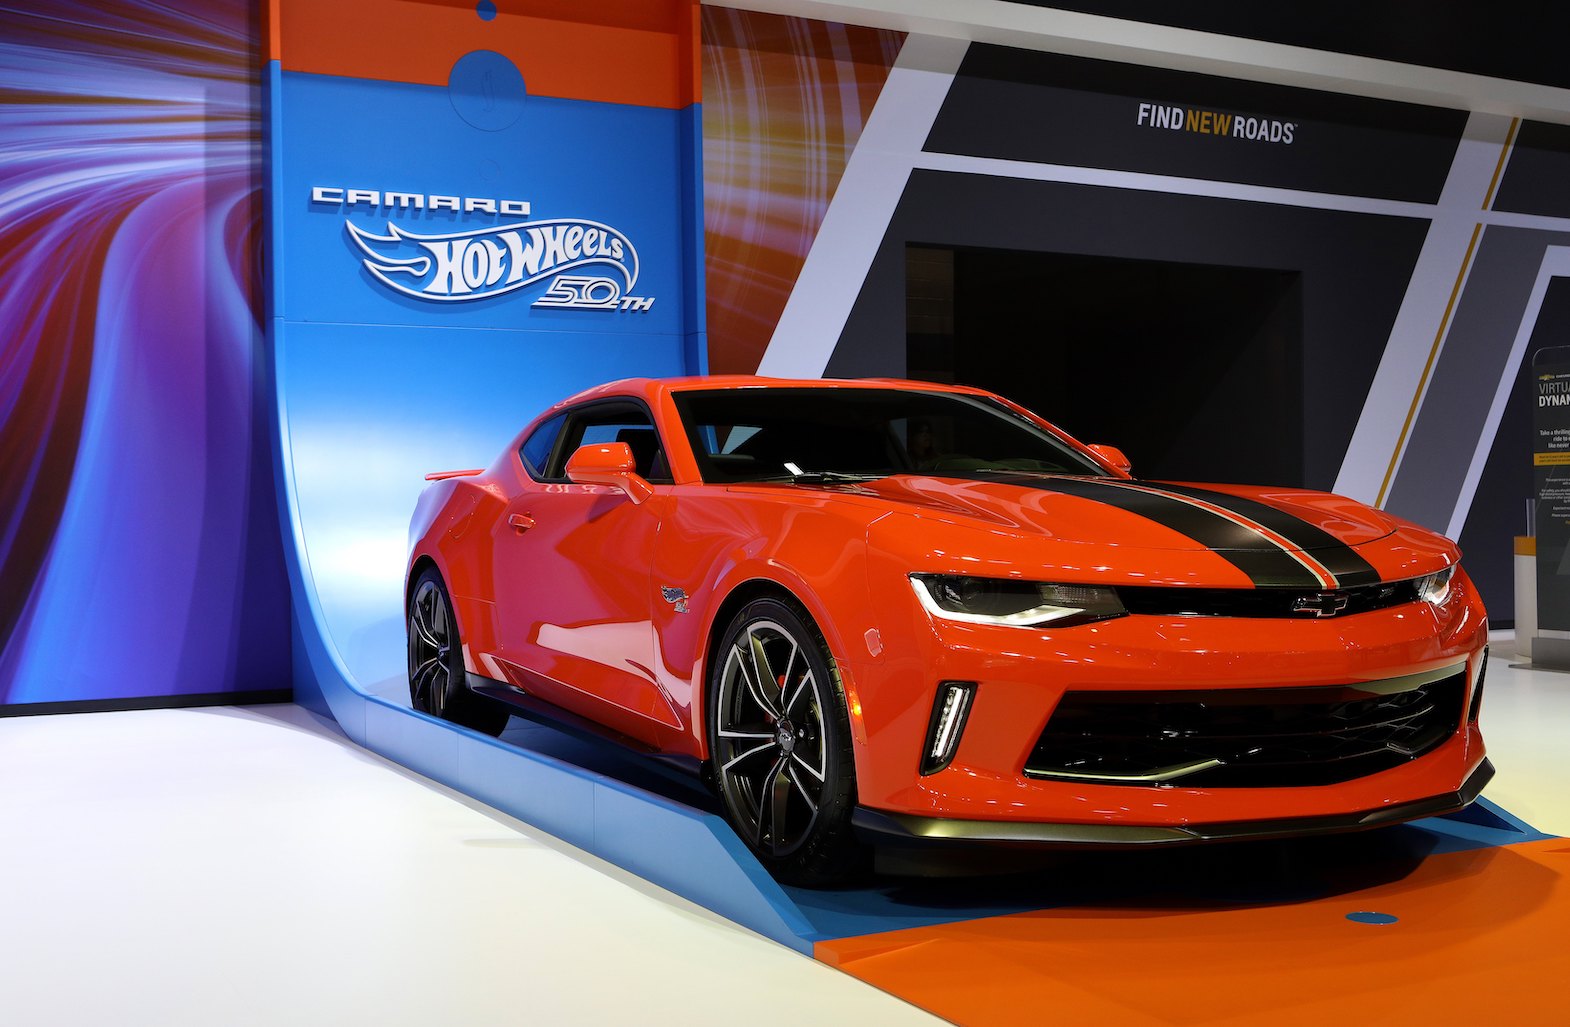 2018 Chevrolet Camaro Hot Wheels Edition is on display at the 110th Annual Chicago Auto Show